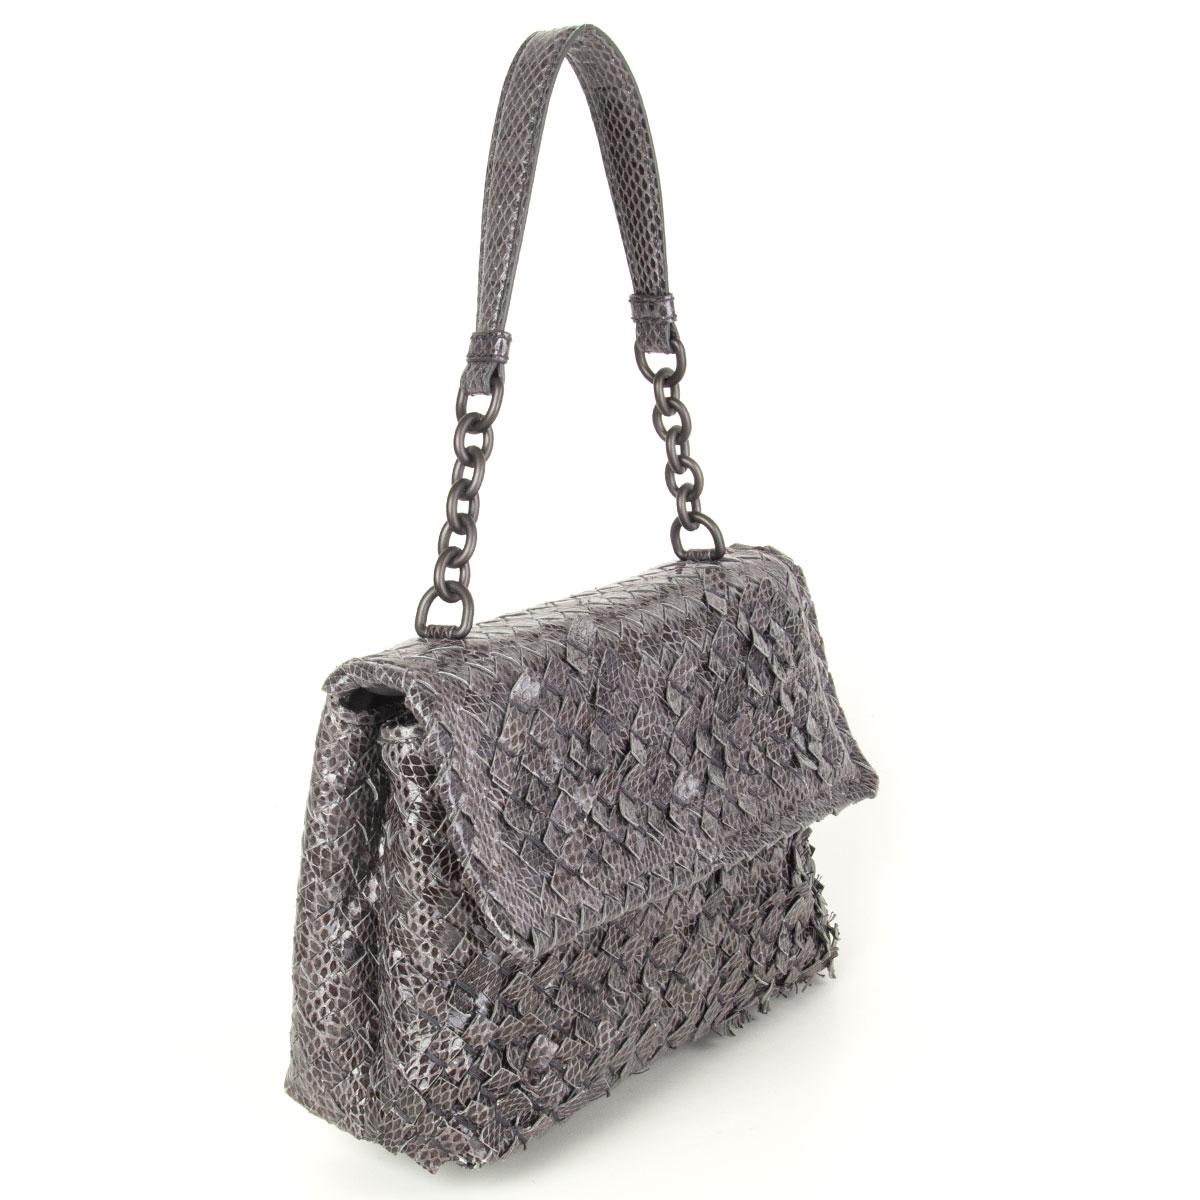 Bottega Veneta 'Baby Olimpia' shoulder bag grey and charcoal Intrecciato Ayers. Opens with a flap and is lined in grey smooth calfskin and suede divided in two compartements with one zipper pocket against the back. Has been carried and is in